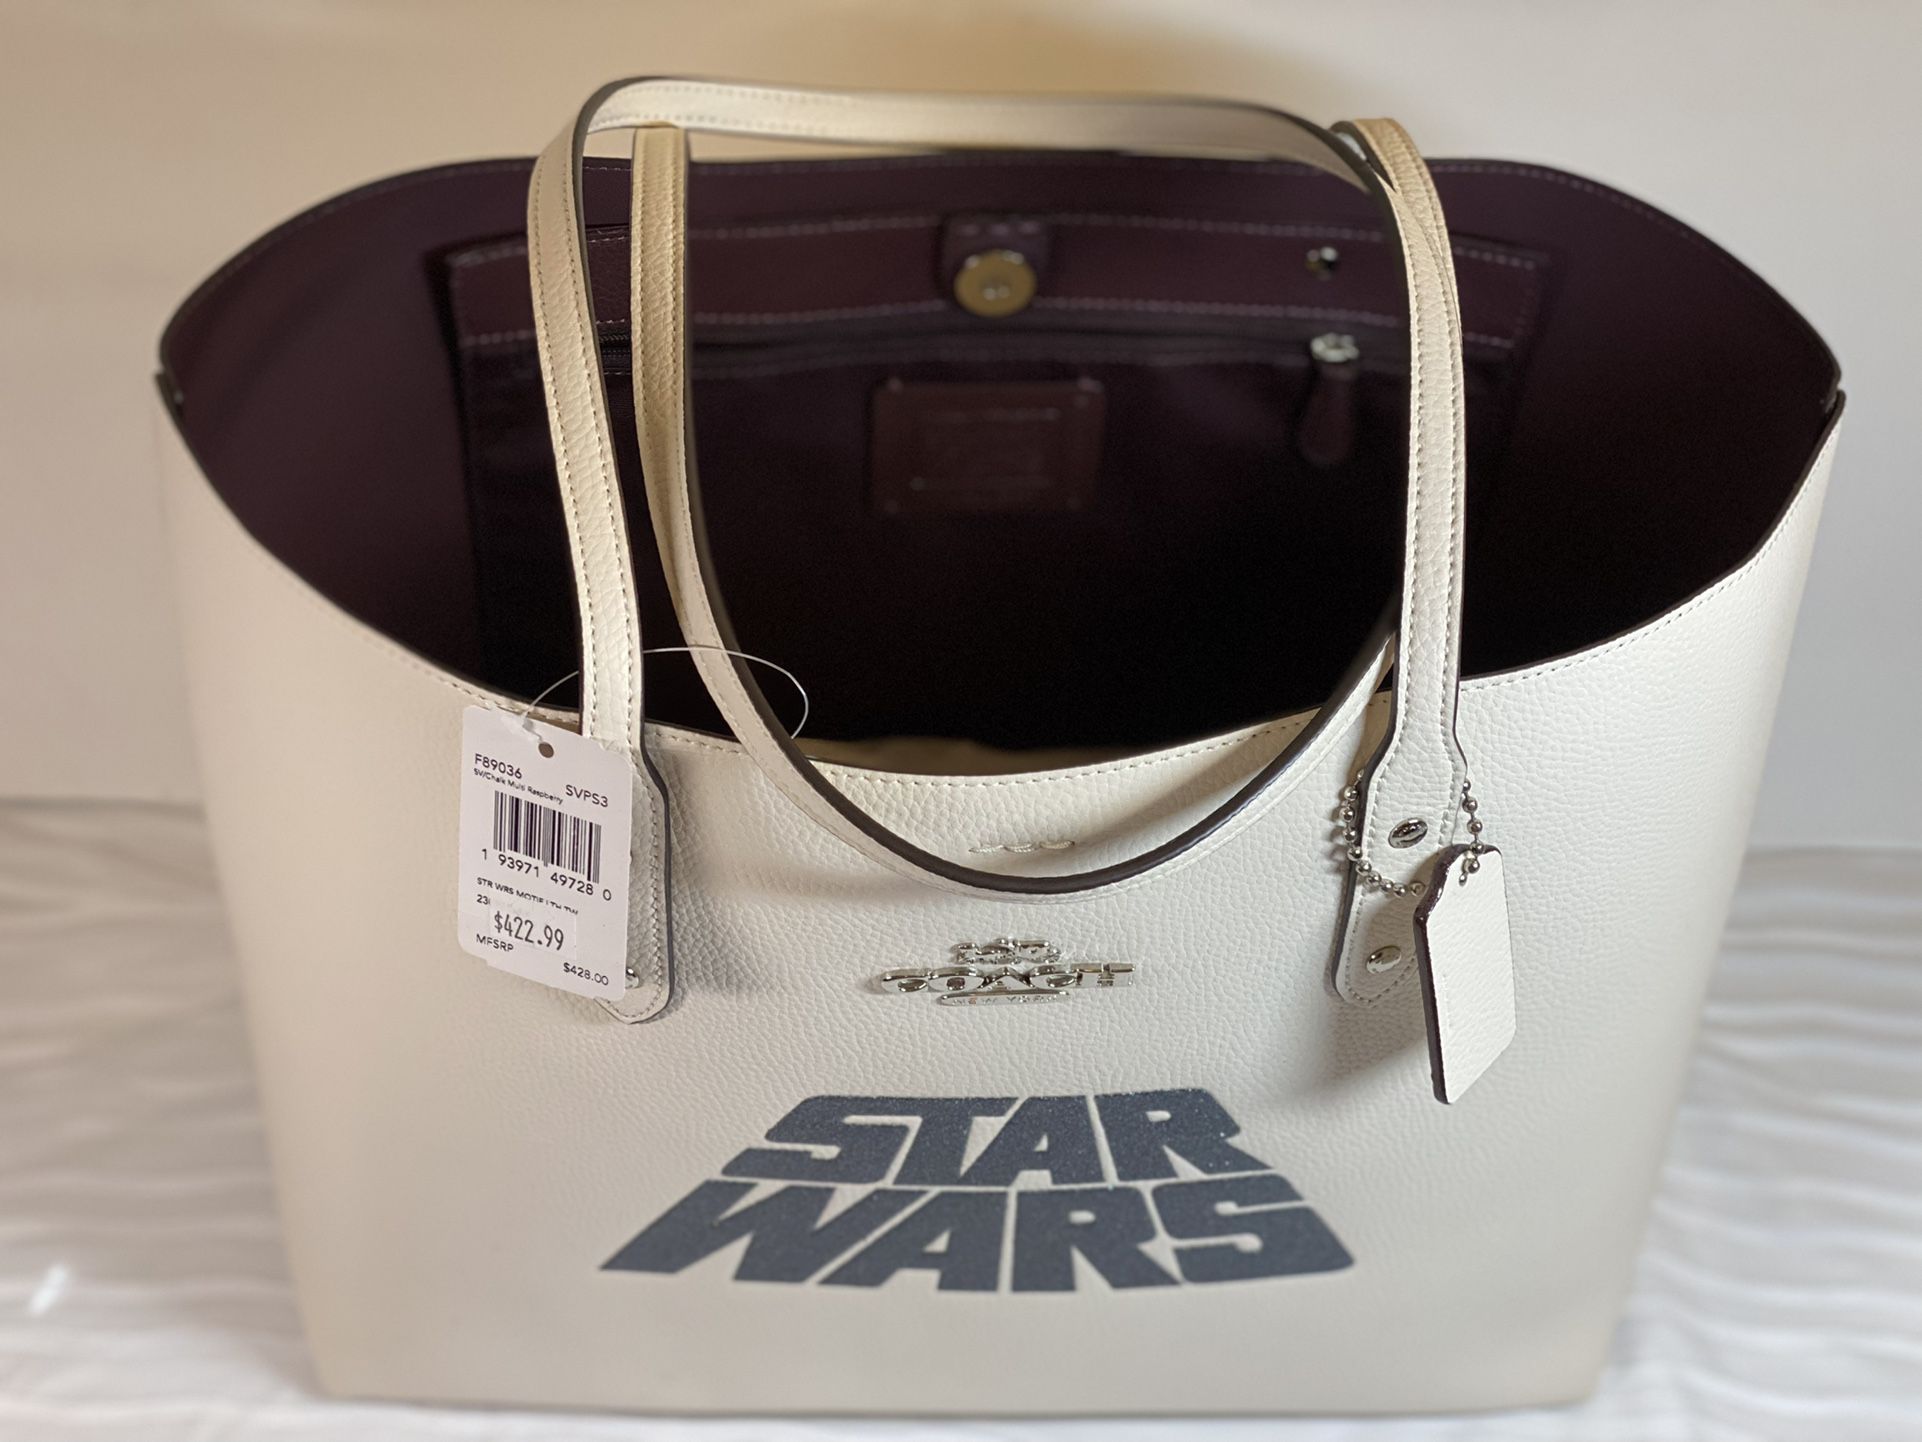 NWT Authentic Coach Collectible Limited Edition Star Wars Large Tote  W/ Complimentary Coach Box, Tissue & Bag - MSRP:$428 - $ALE FIRM Price:$175